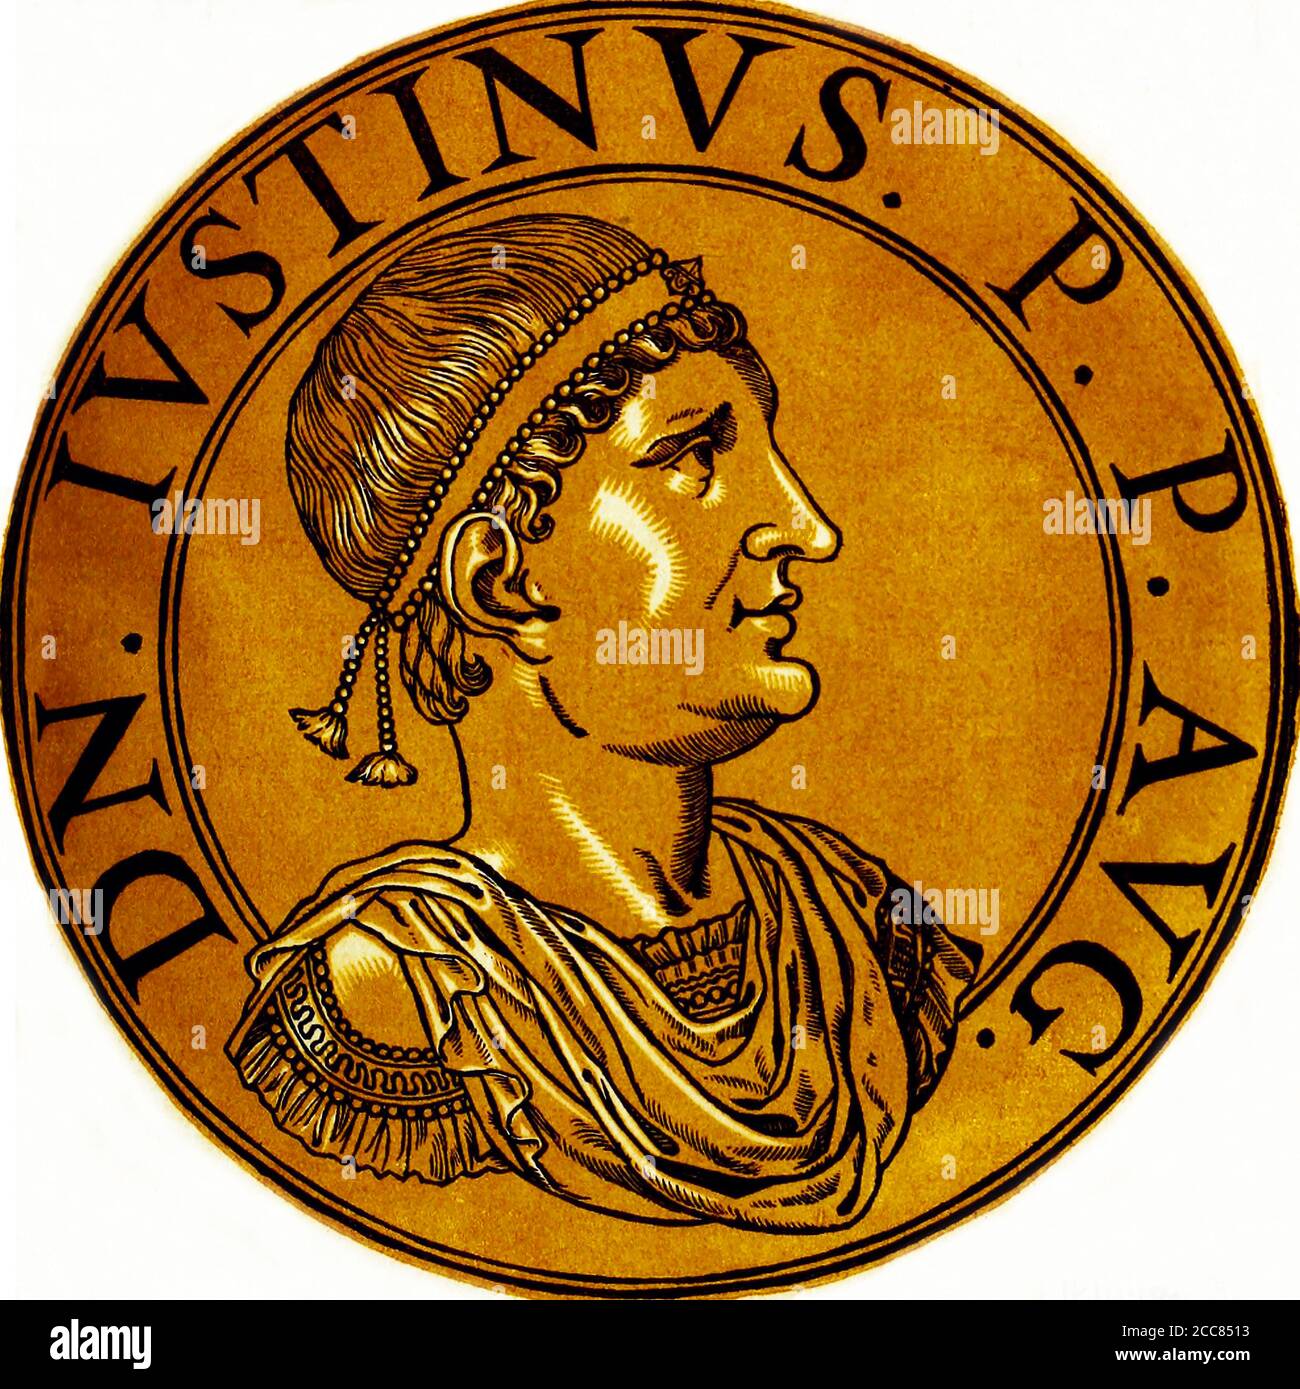 Turkey / Byzantium: Justin II (520-578), Byzantine emperor, from the book Icones imperatorvm romanorvm (Icons of Roman Emperors), Antwerp, c. 1645. Justin was the nephew of Emperor Justinian I and had supposedly been named his heir on the emperor's deathbed. Justin's early rule relied completely on the support of the aristocratic party, and faced with an empty treasury, he stopped paying off potential enemies as his uncle had done, leading to Avar invasions across the Danube river. Stock Photo